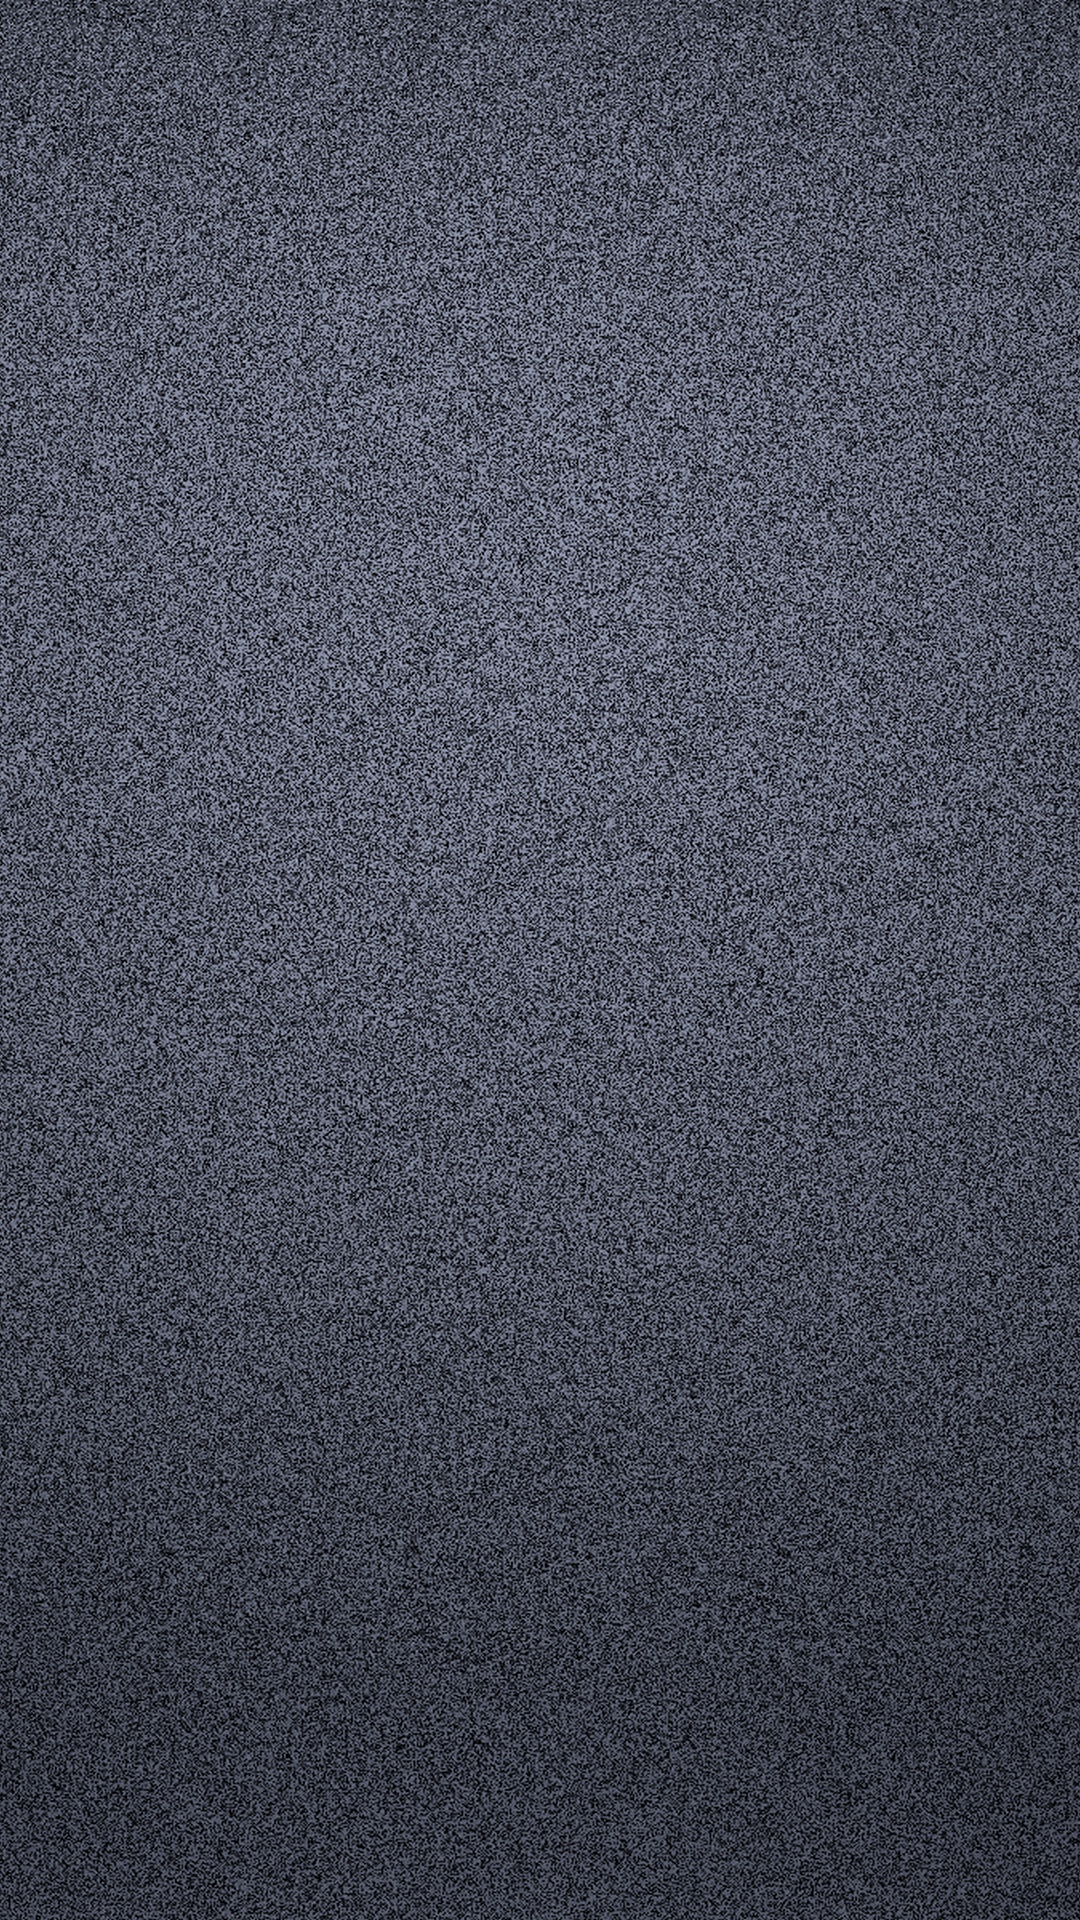 Galaxy S4 wallpaper with gray stone pattern in 1080x1920